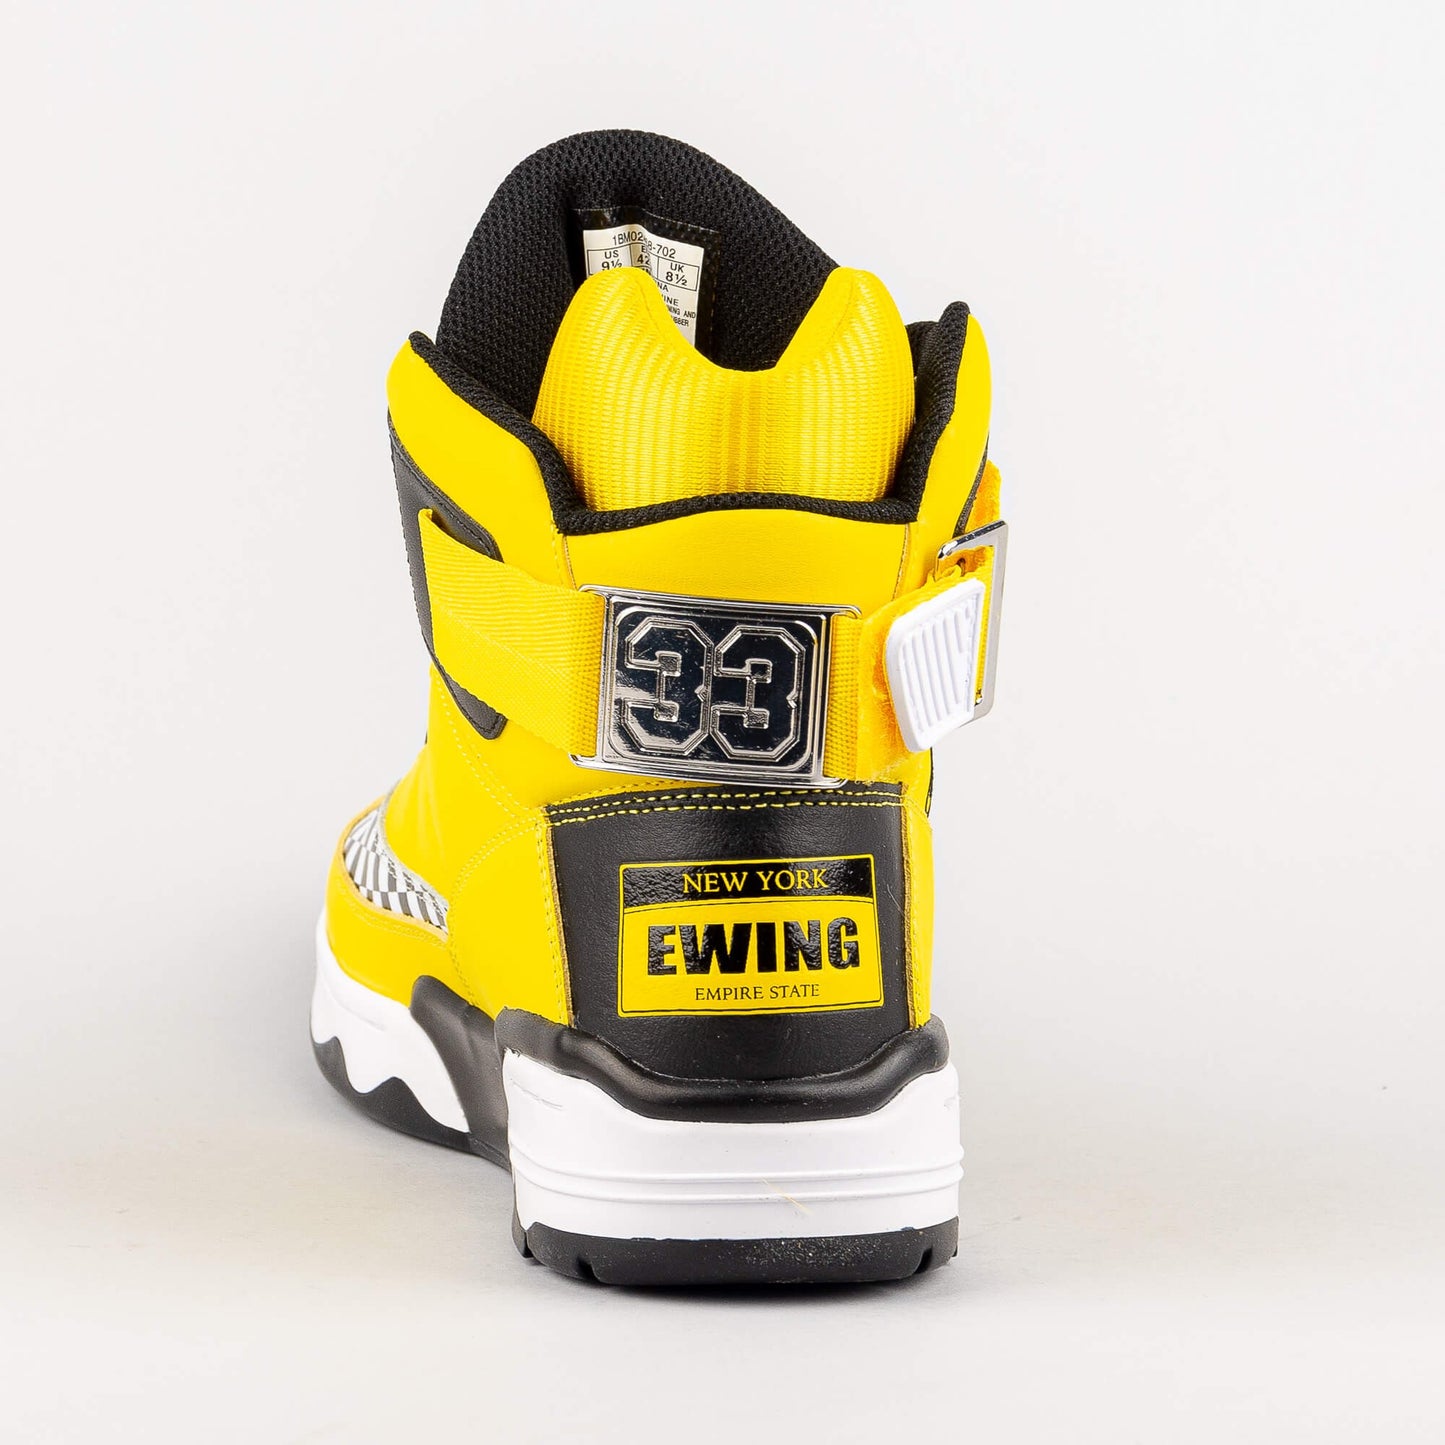 Ewing Athletics 33 HI “NYC Taxi” Yellow/Black White Inspired by NYC Taxi